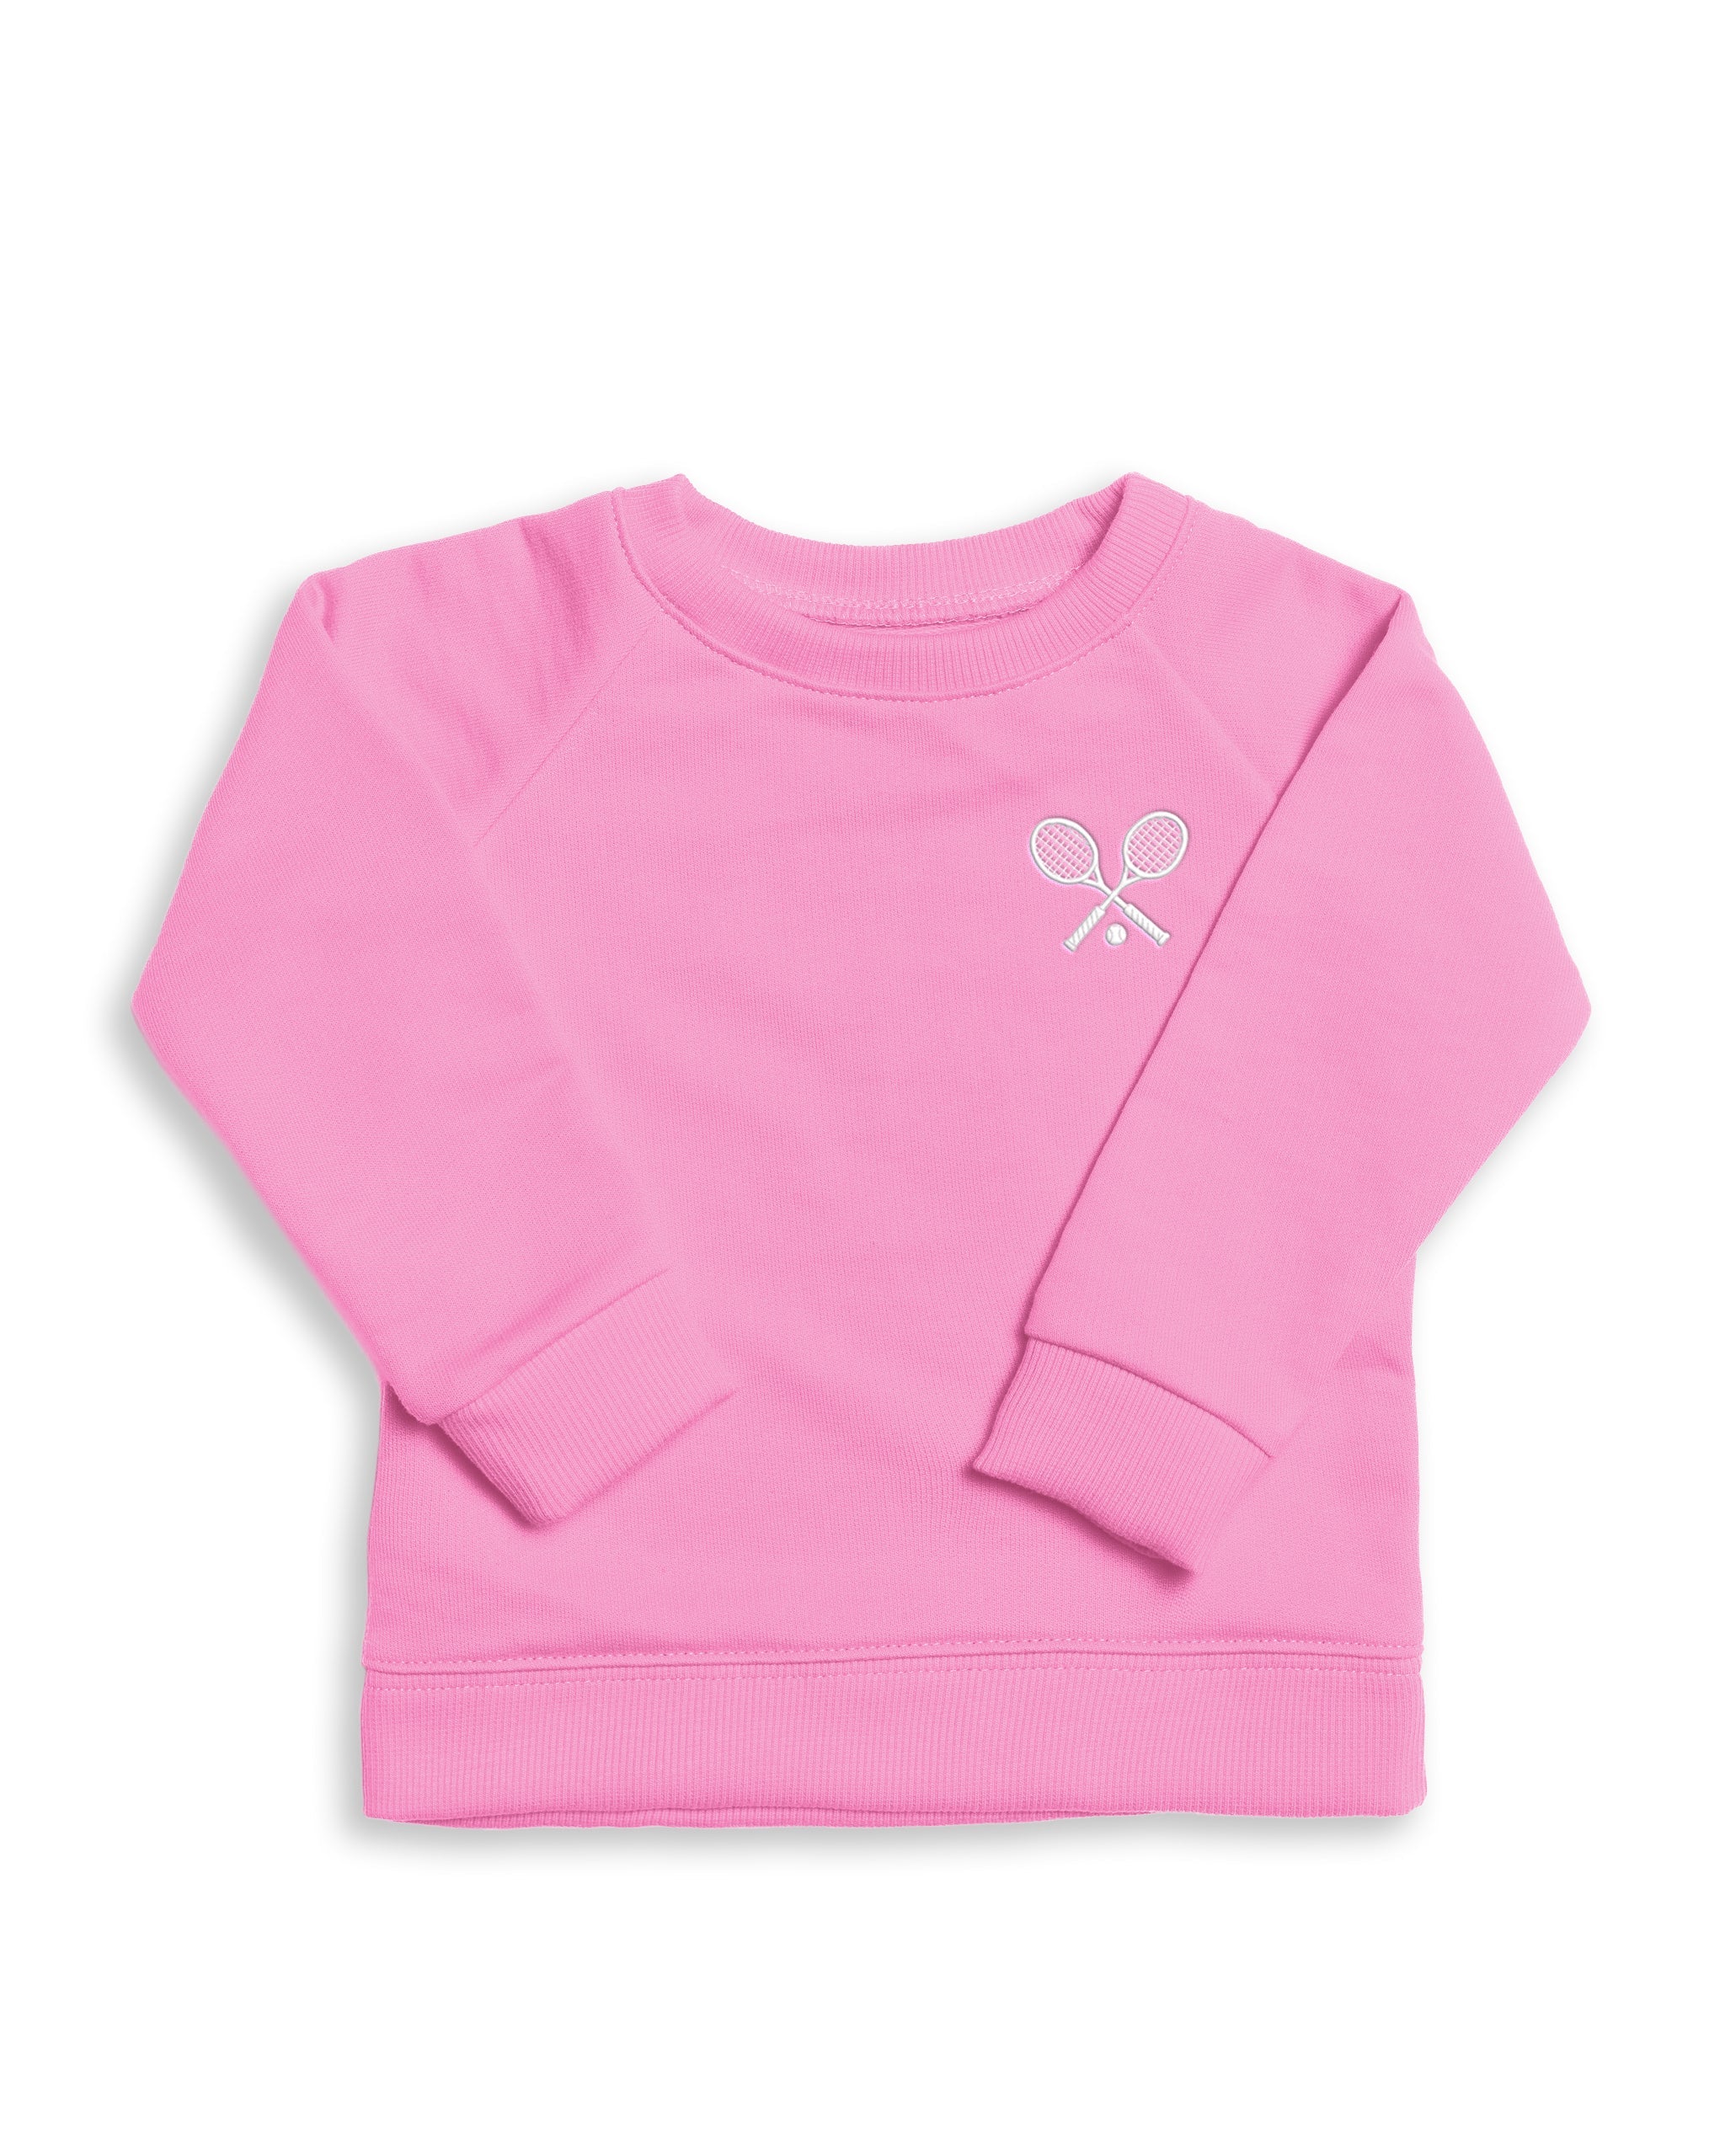 The Organic Embroidered Pullover Sweatshirt #color_Malibu Pink Tennis